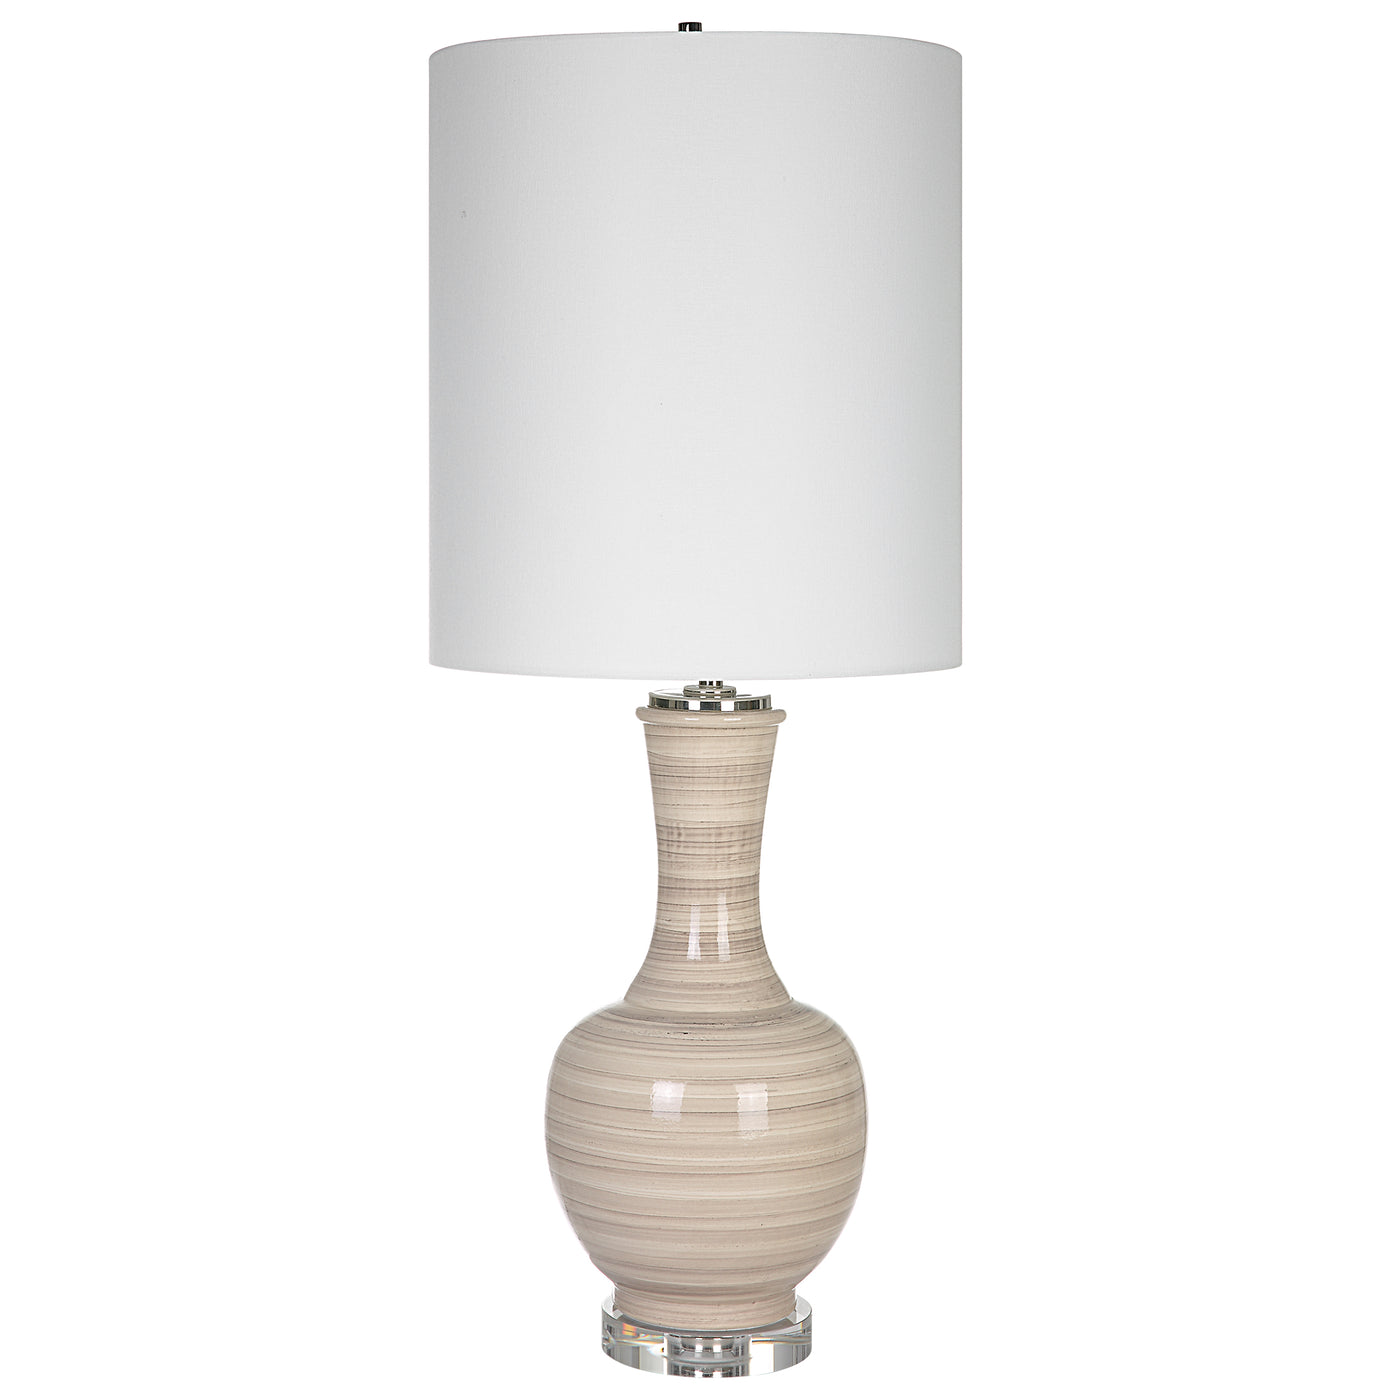 Uttermost Chalice Striped Table Lamp